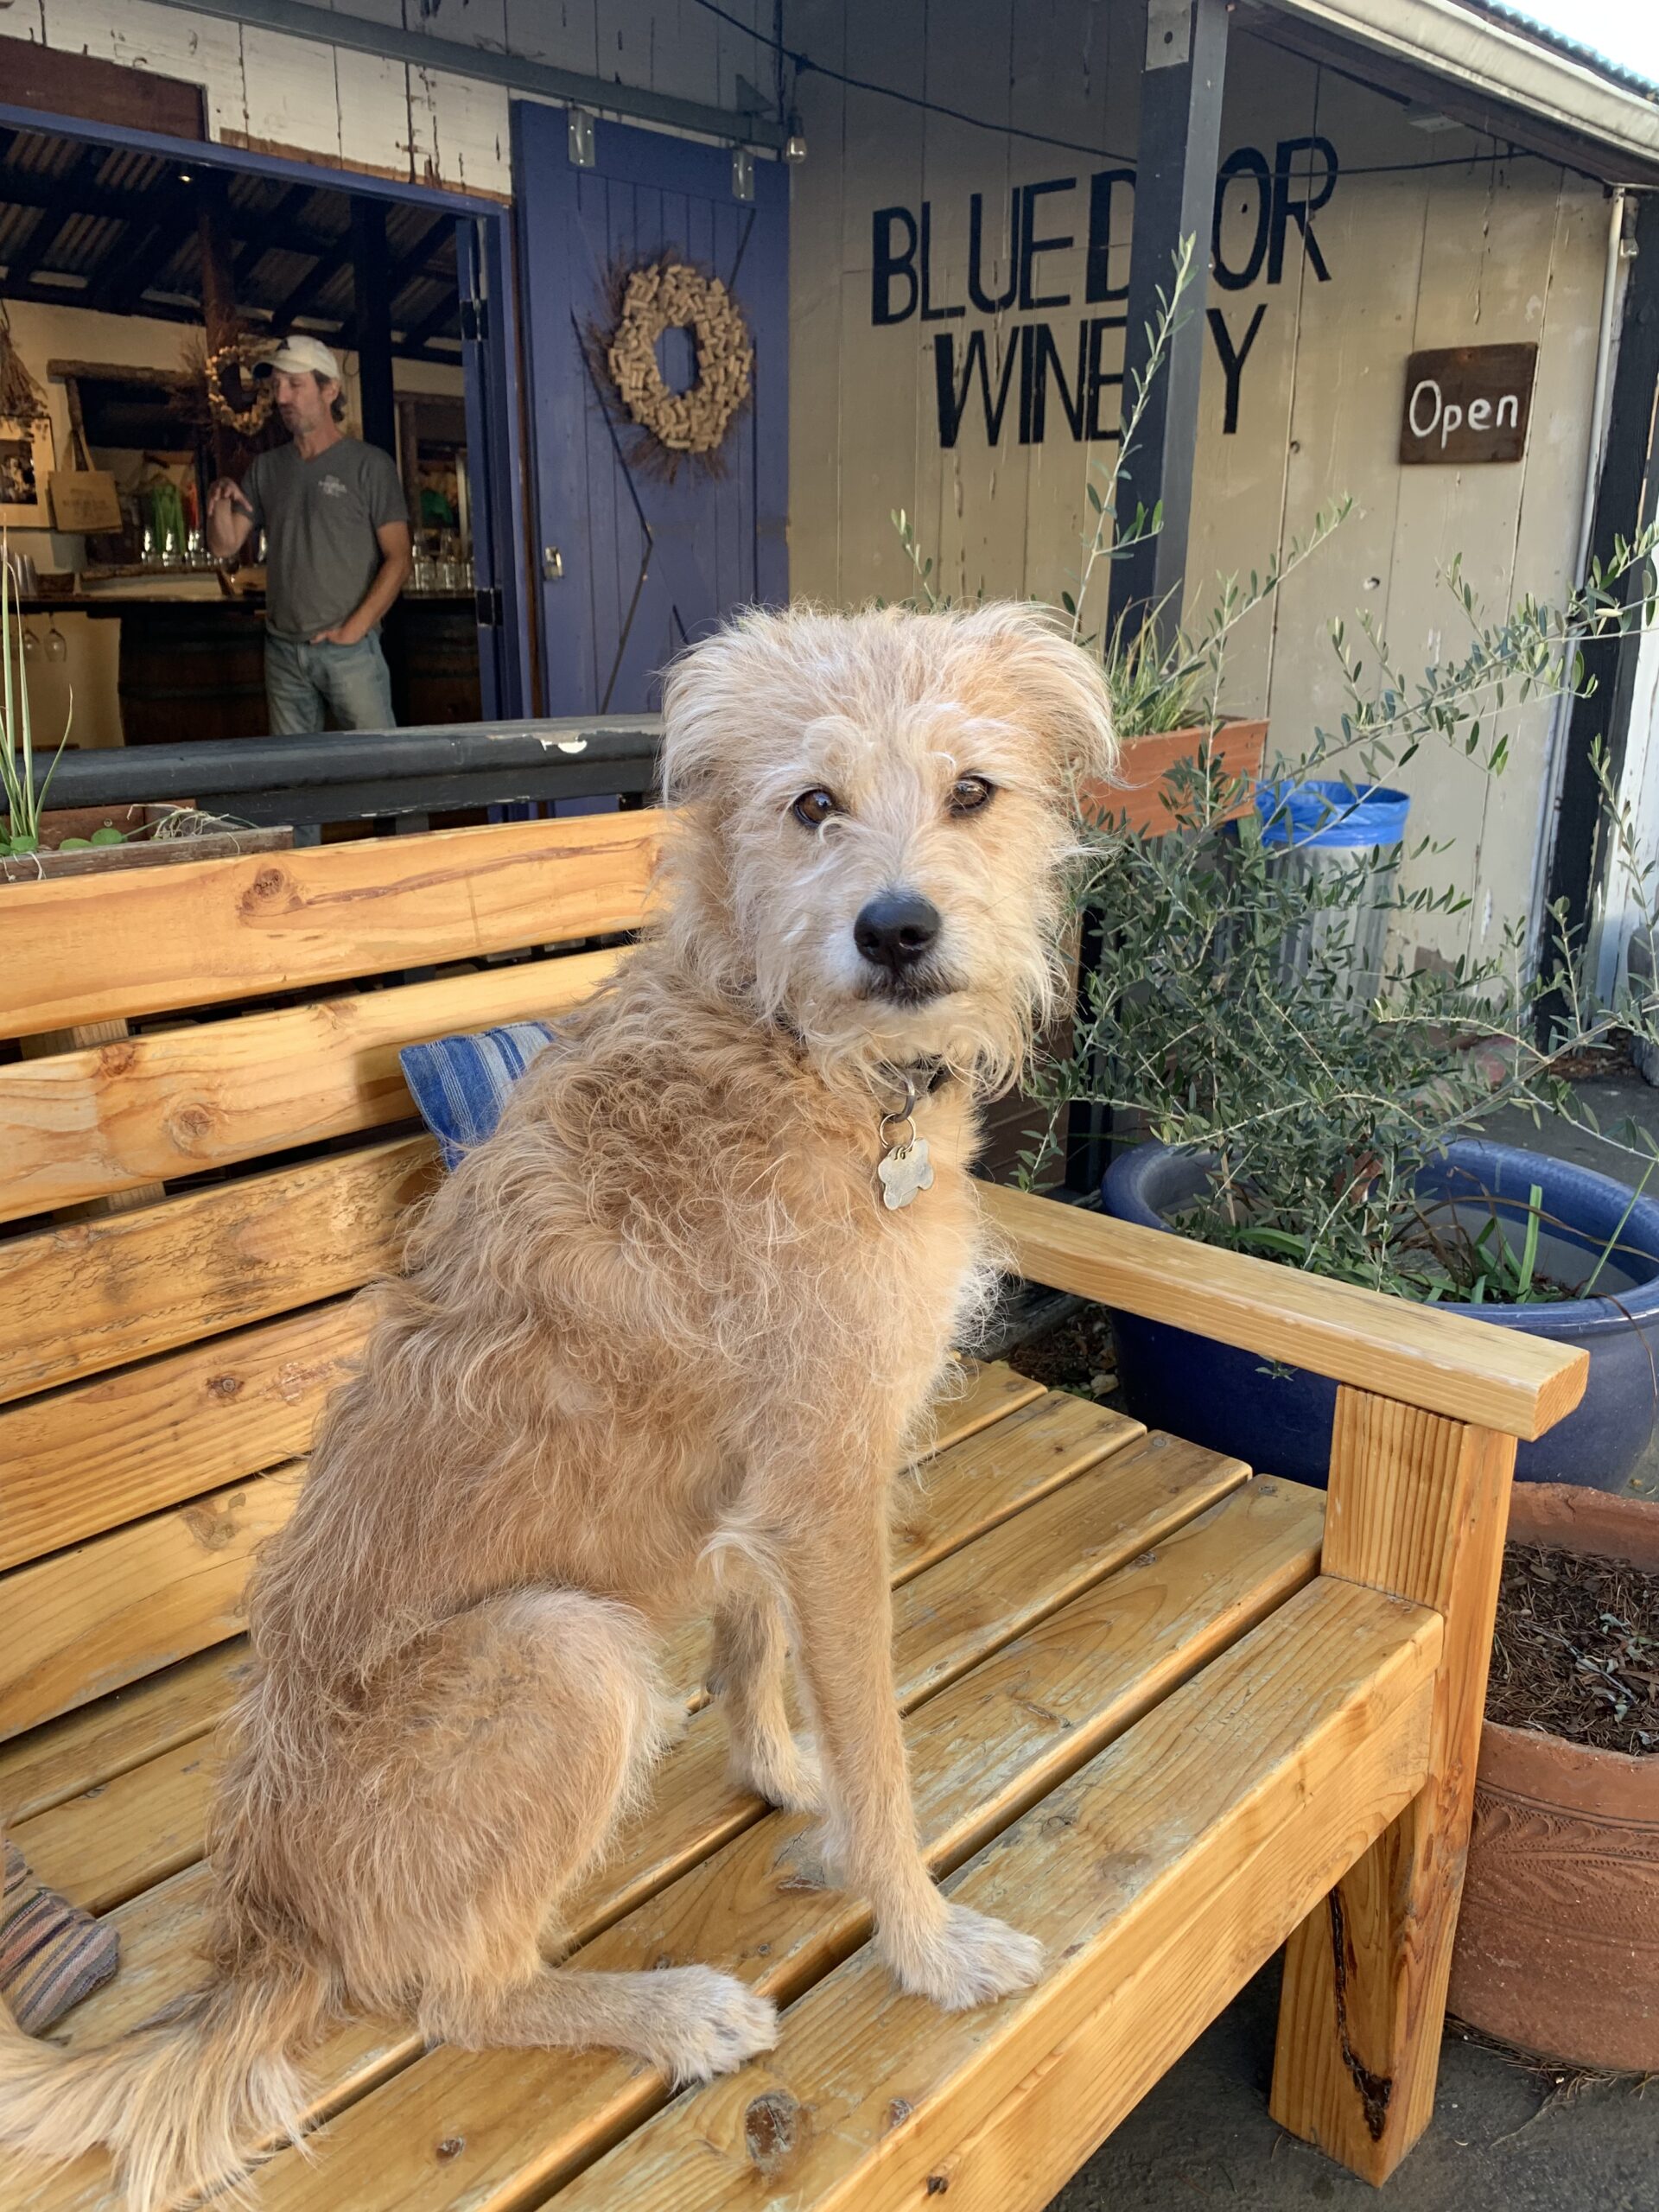 Dog sitting on bench in front of Blue Door Winery photo